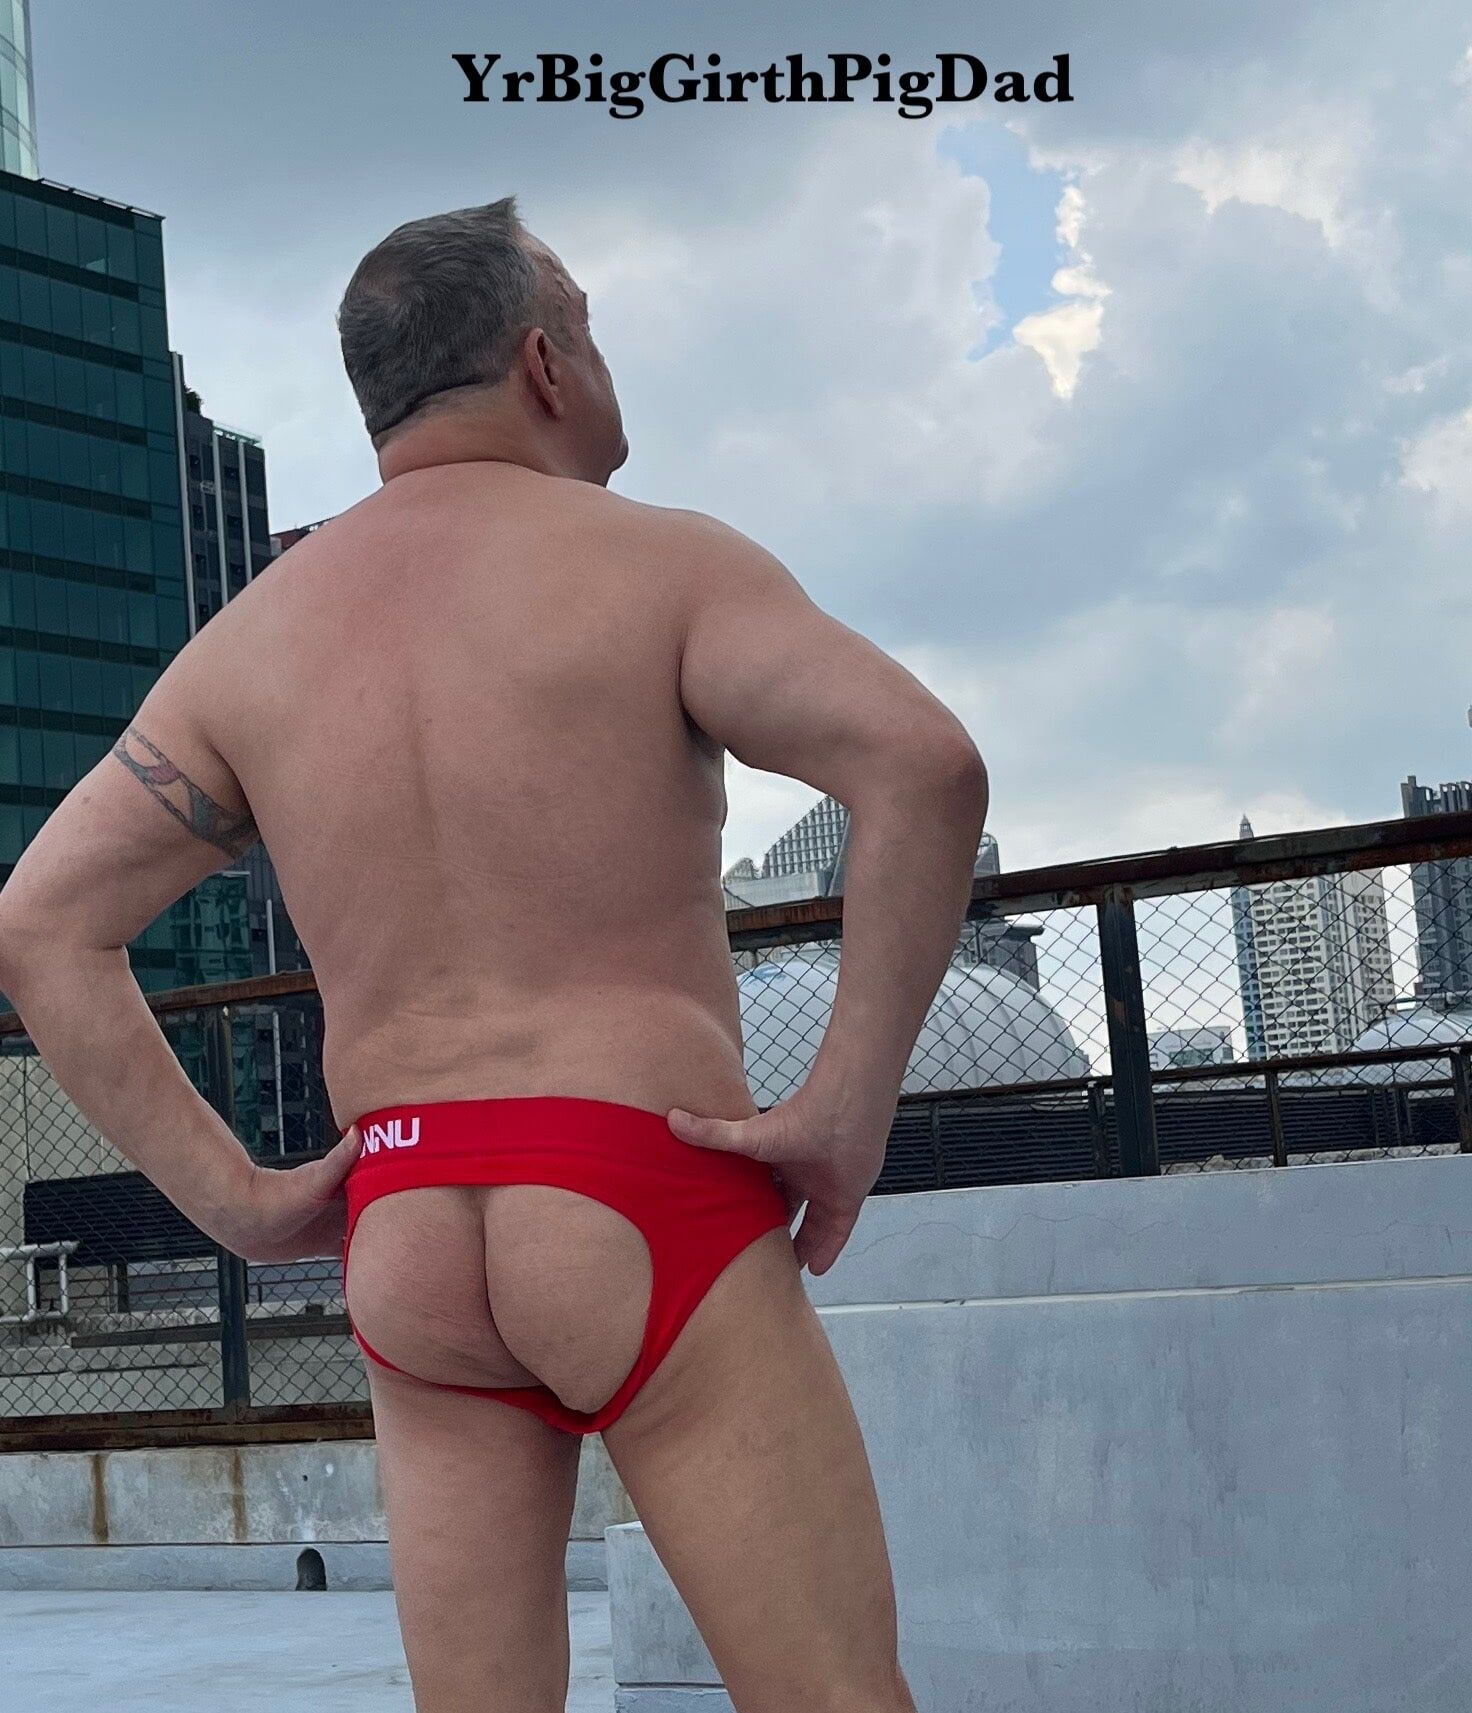 New Jockstrap collection on the roof of my condo. #3